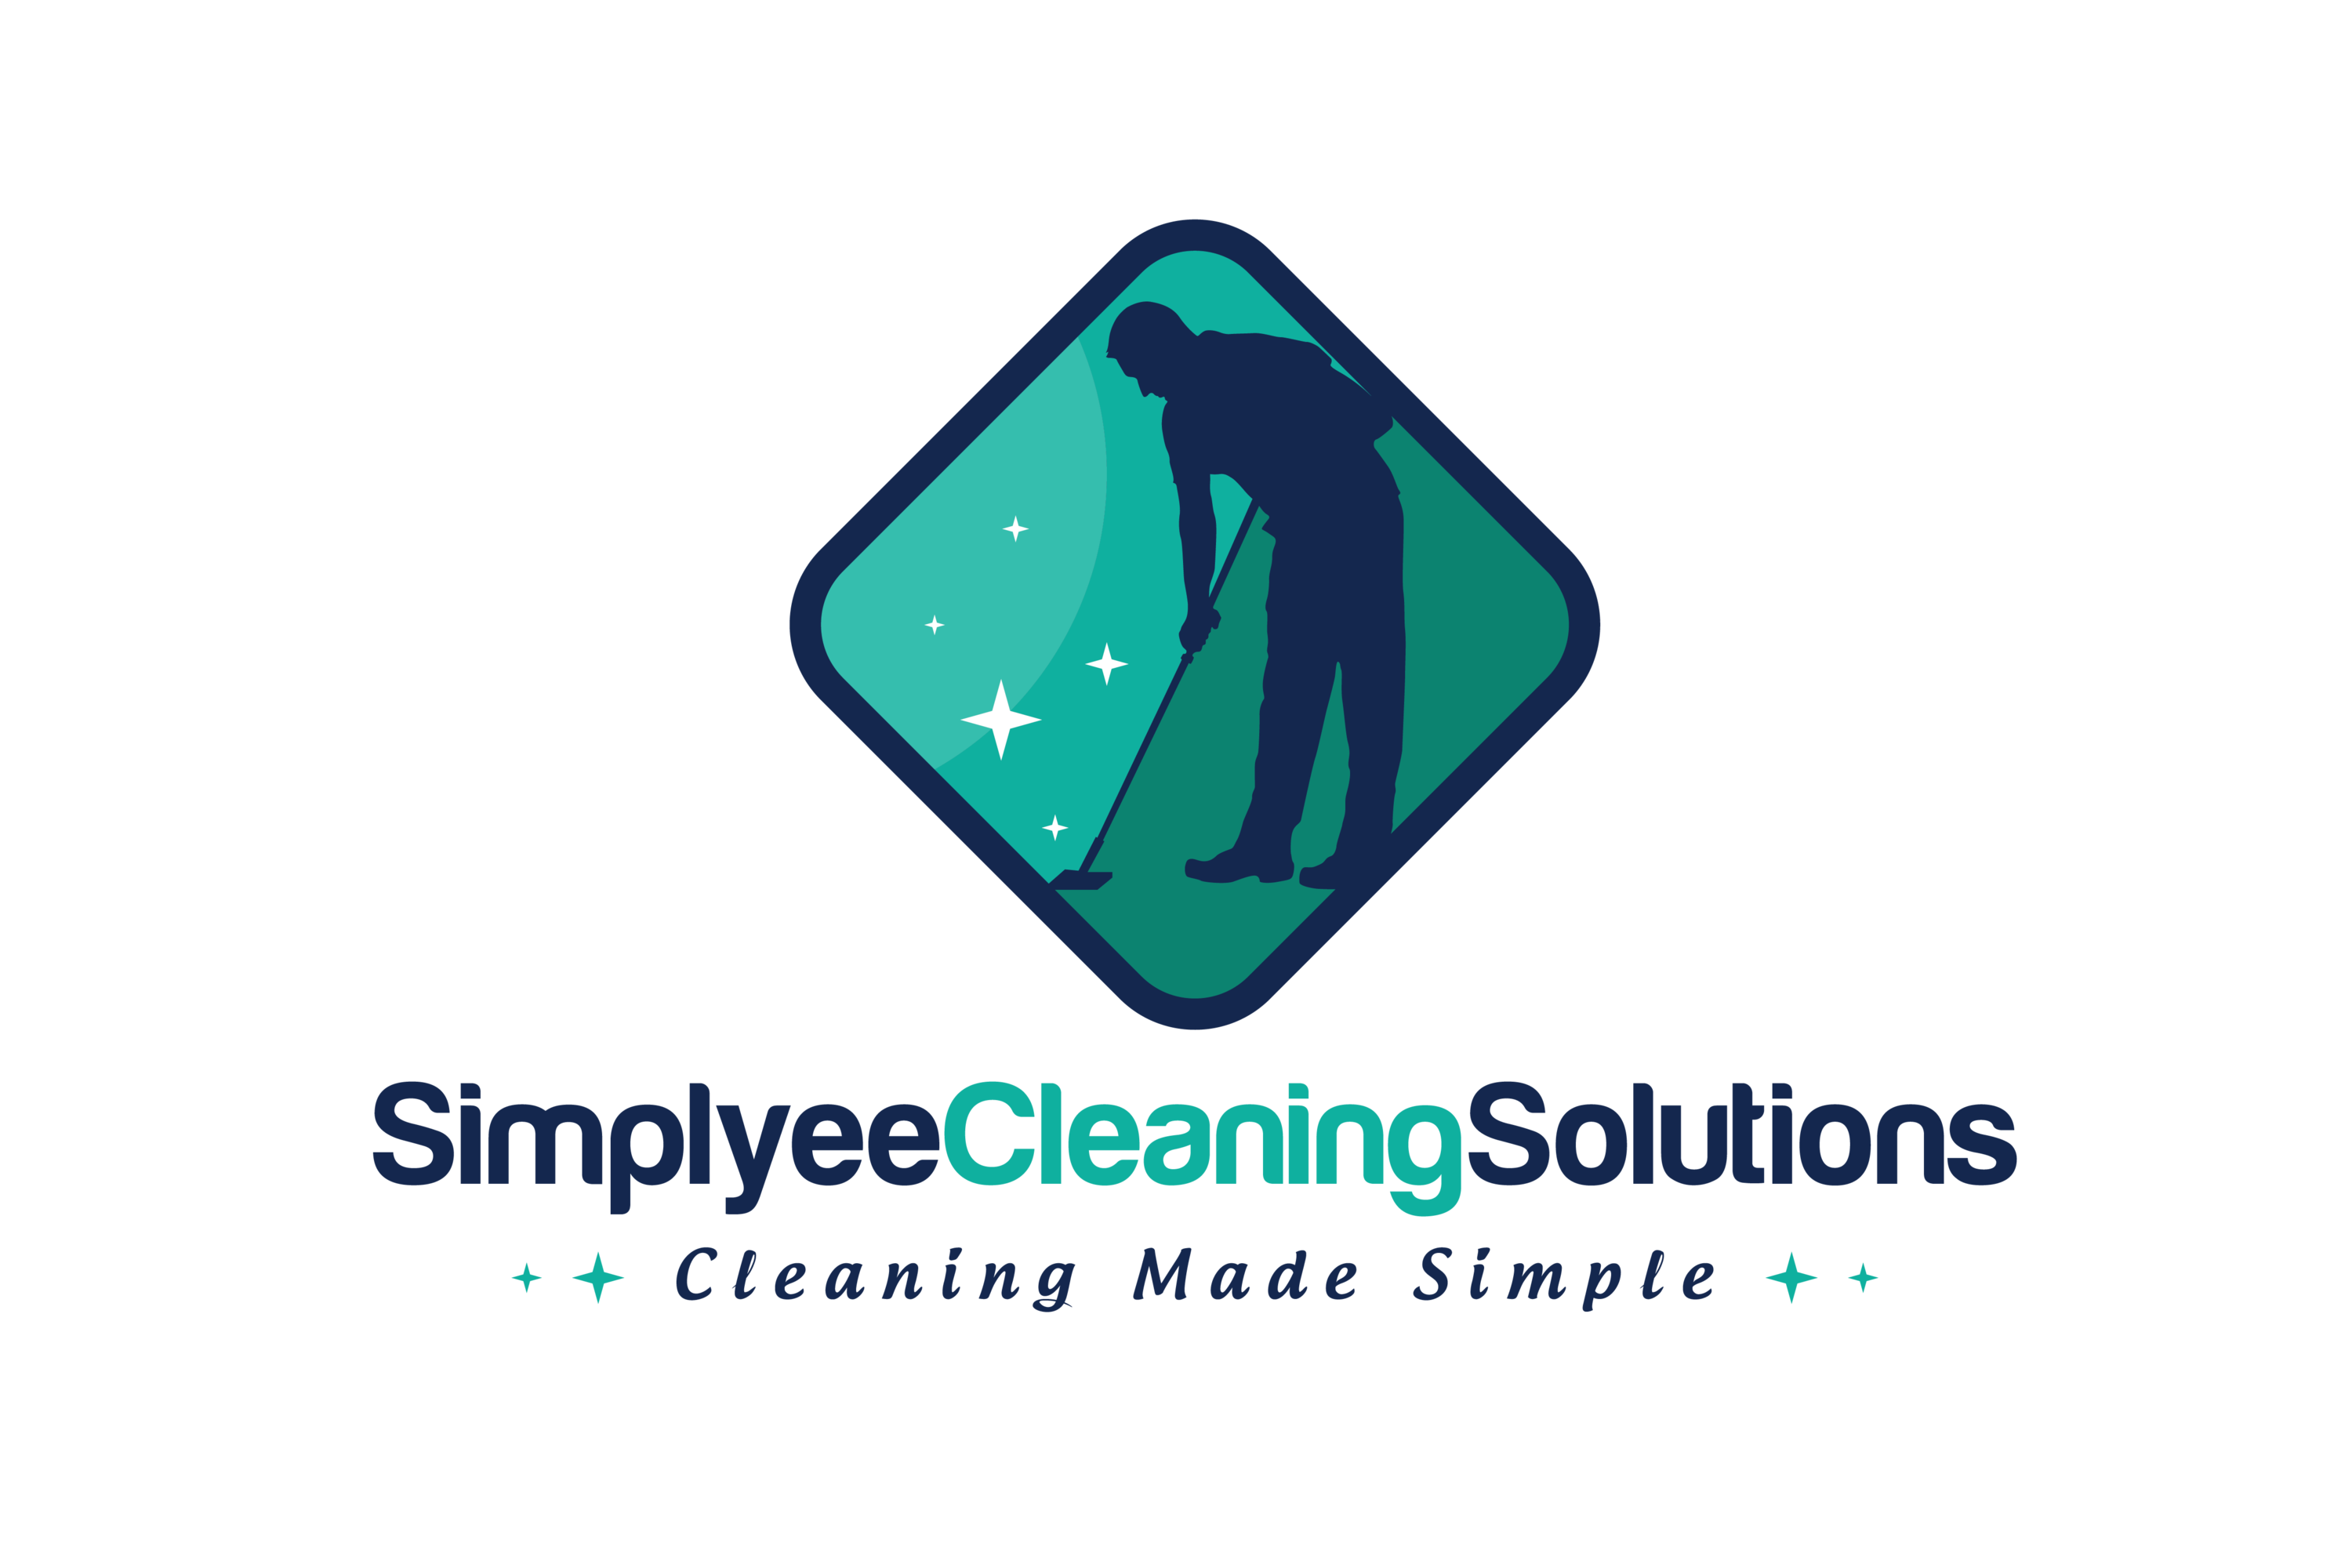 Commercial Cleaning, Simplyee Cleaning Solutions, RI cleaning, Cleaning services